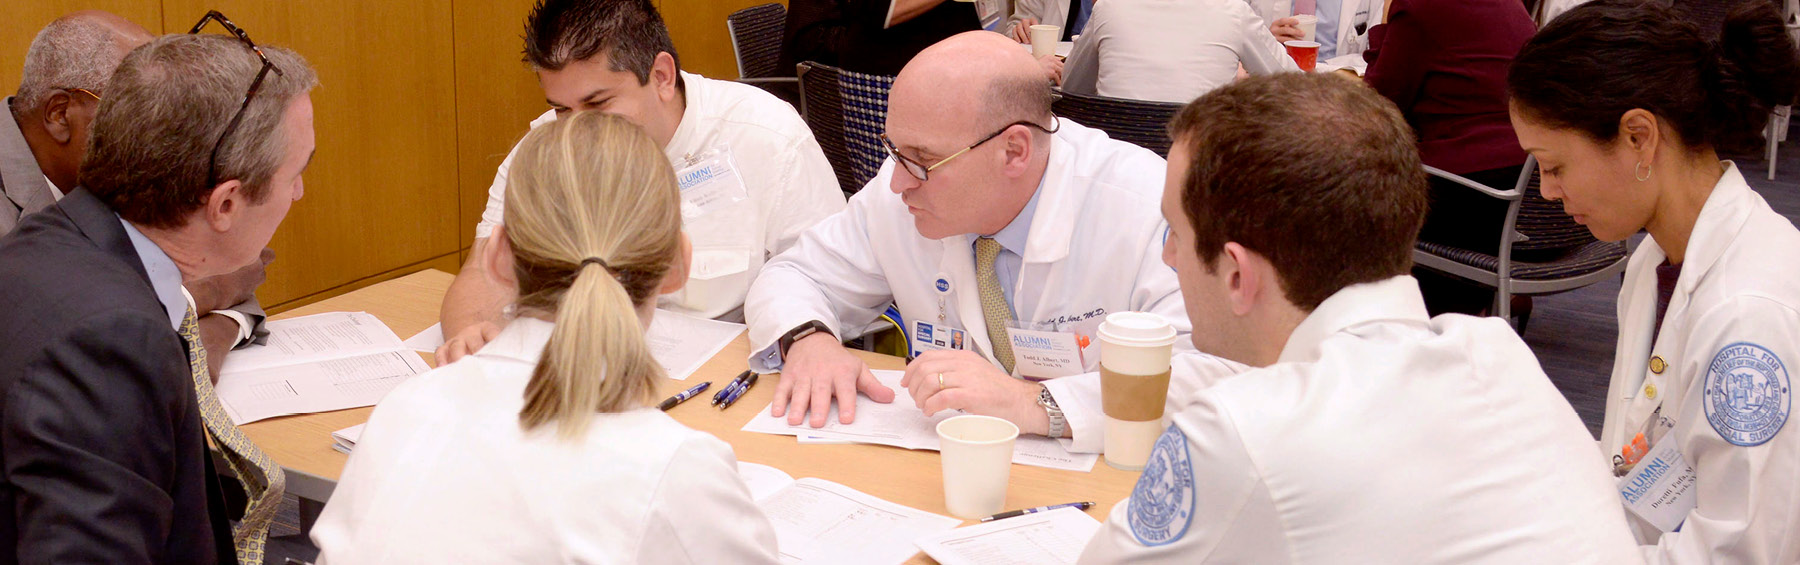 Banner image of Dr. Todd Albert having a round table discussion with physicians